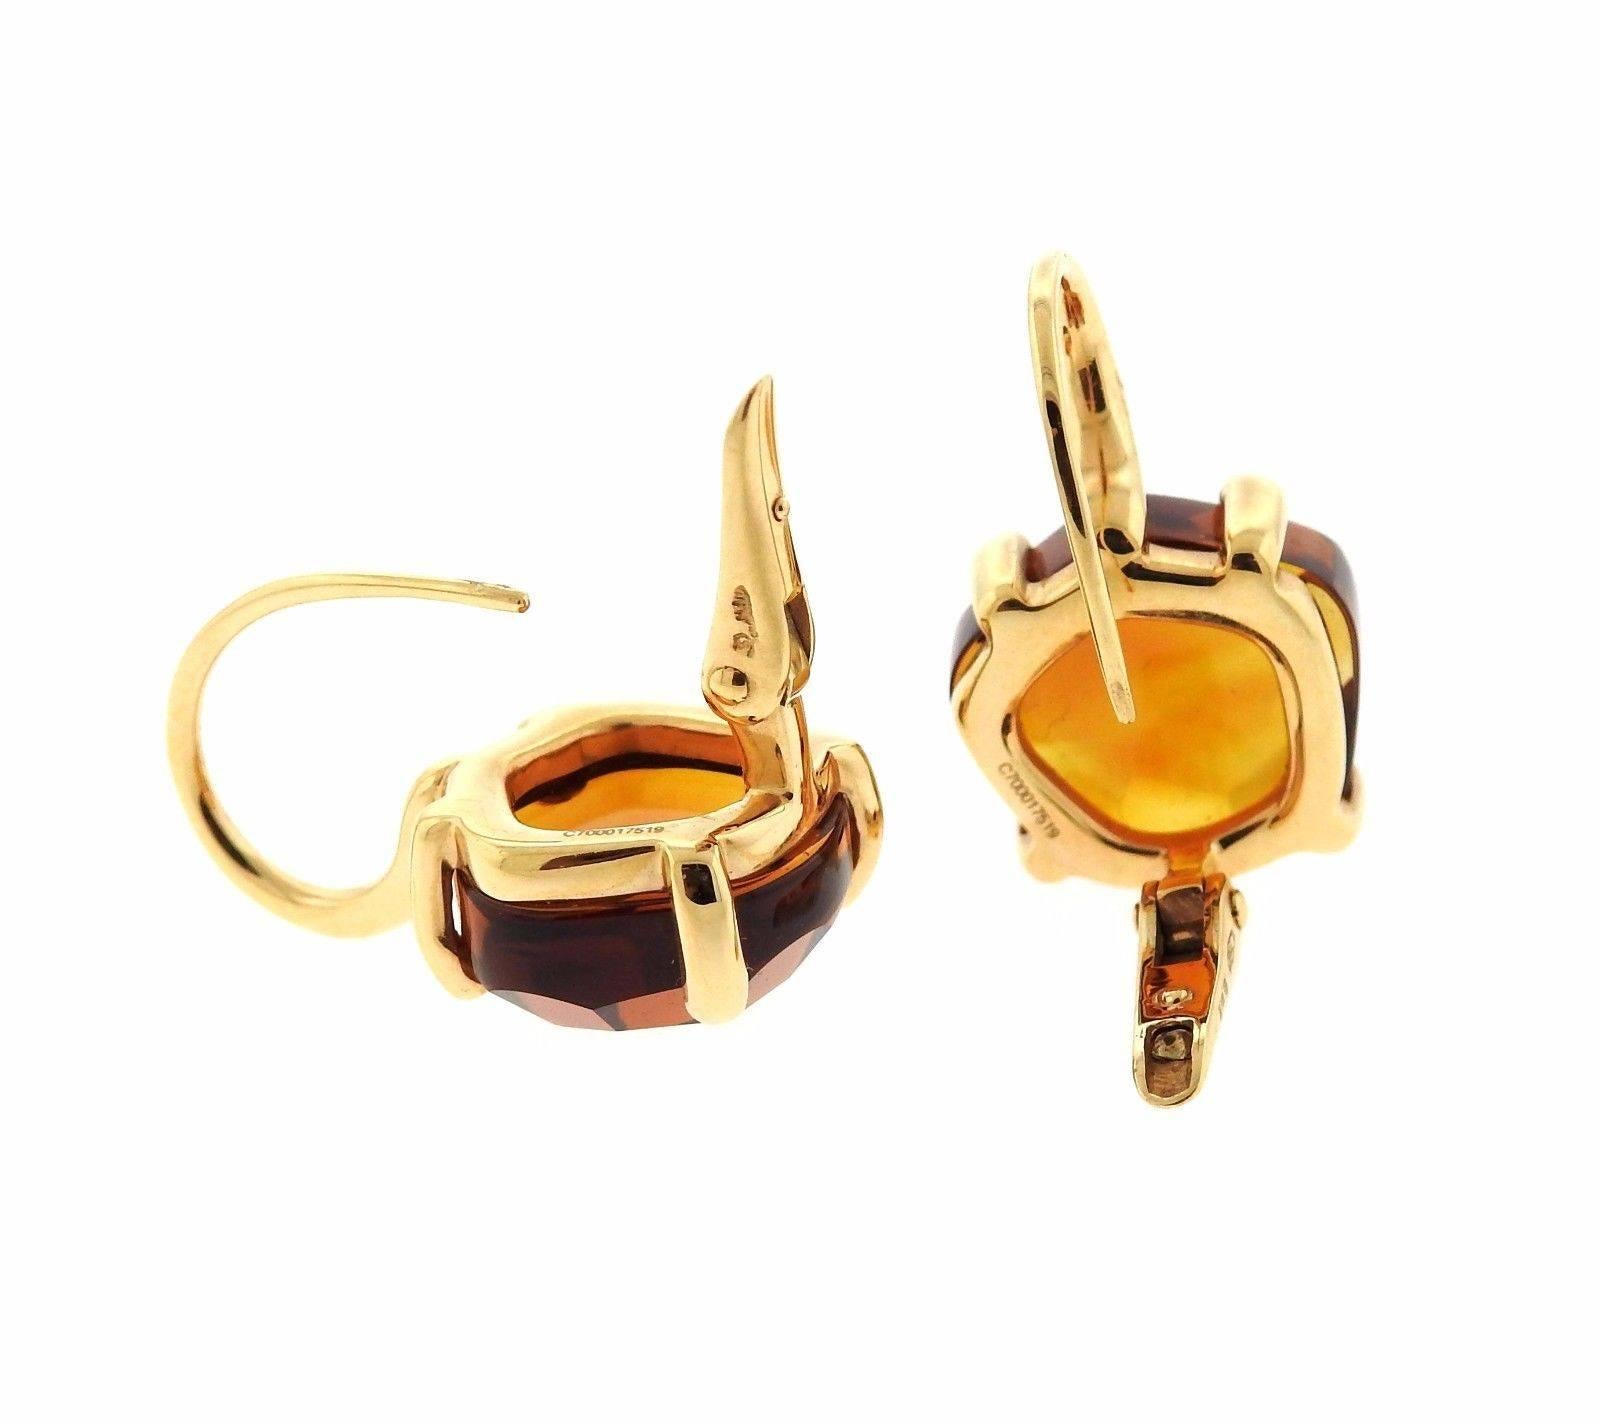 A pair of 18k yellow gold earrings set with madeira quartz.  The earrings measure 23mm x 15mm and weigh 10 grams.  Marked: Pomellato, 750, Italian mark. Retail is $6,290.
